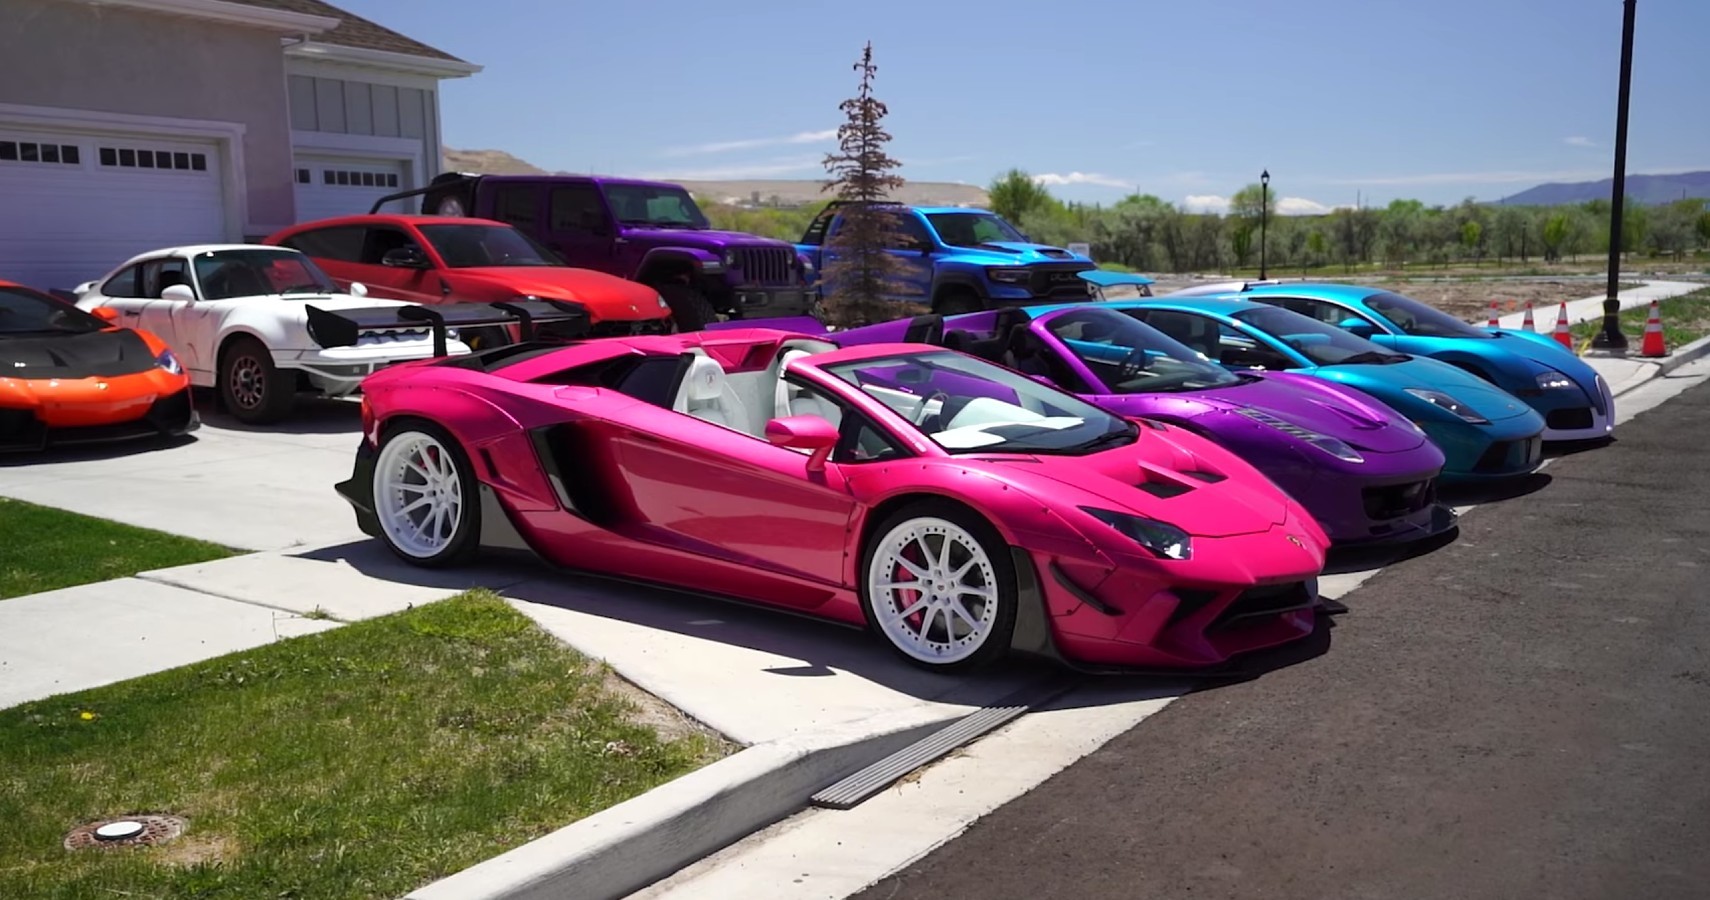 YouTuber Does a Valuation of His Supercar Fleet, Totals a Little Over